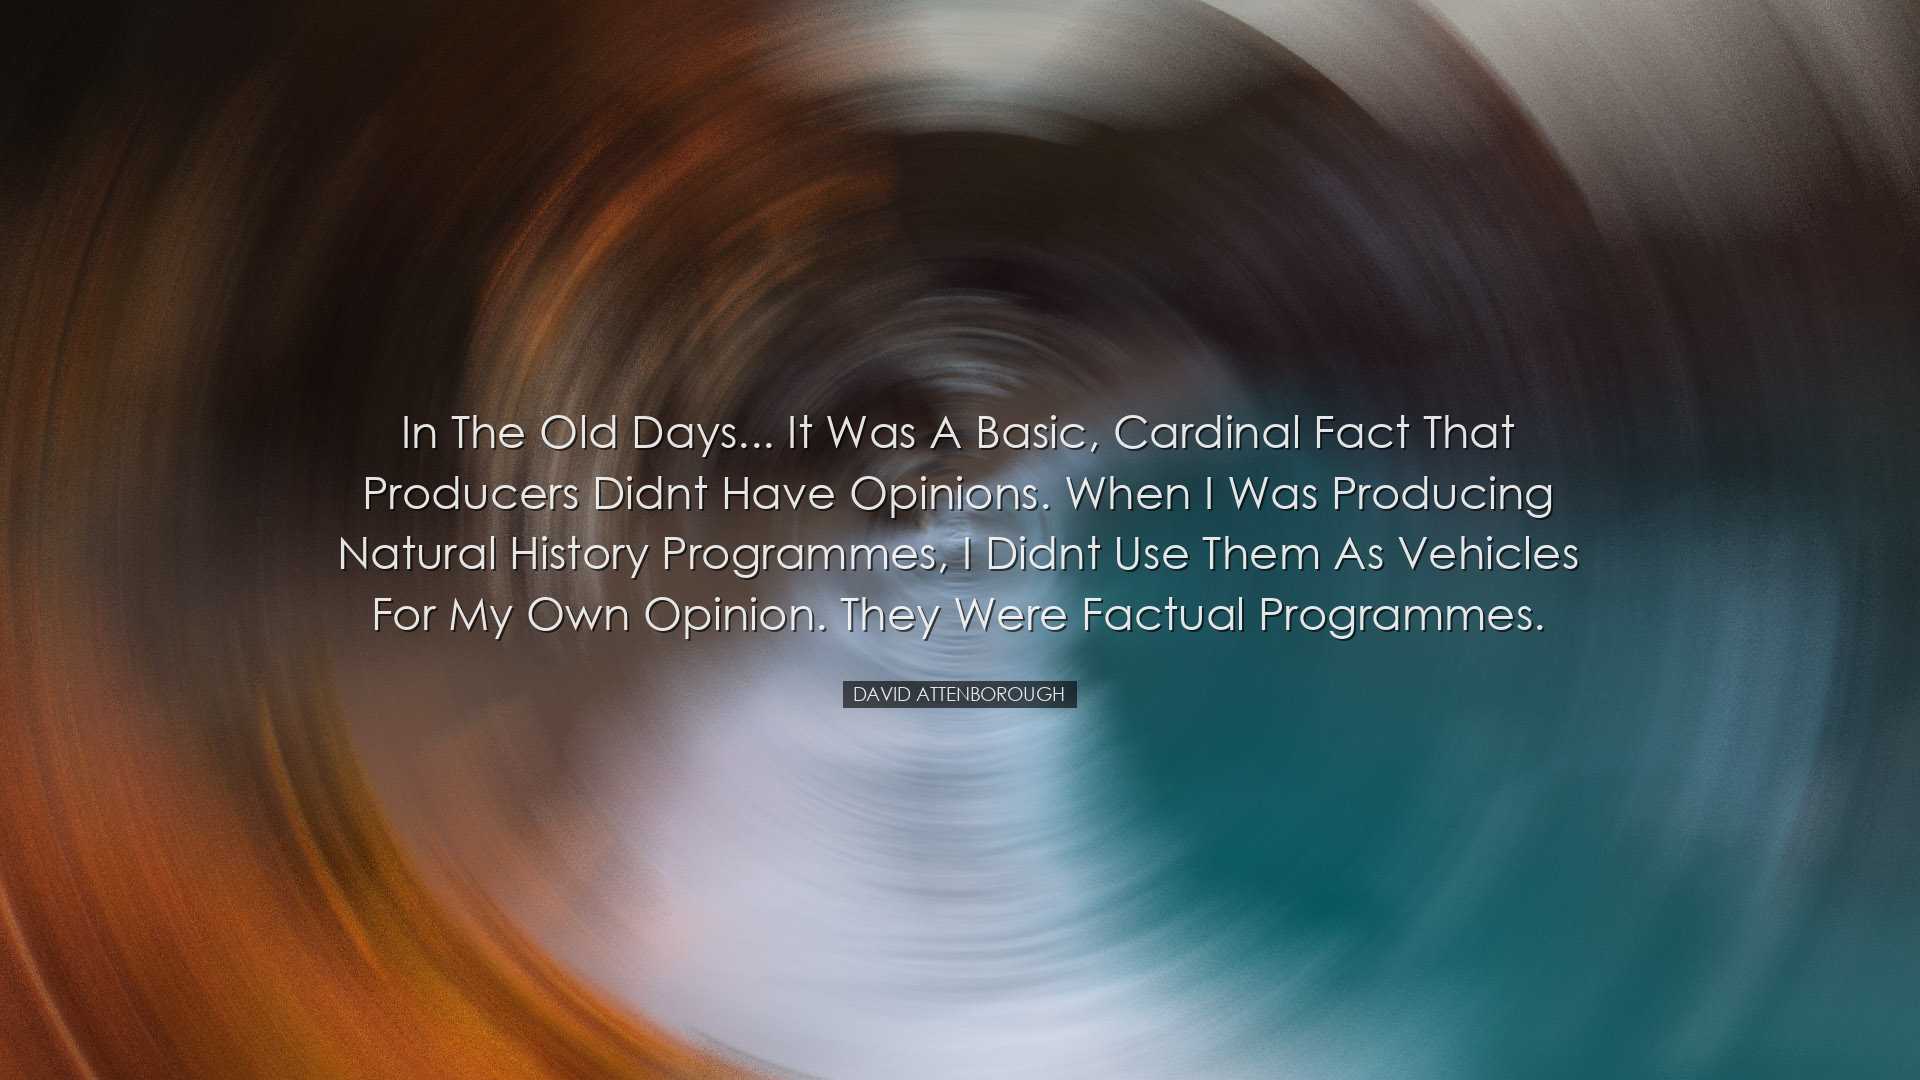 In the old days... it was a basic, cardinal fact that producers di